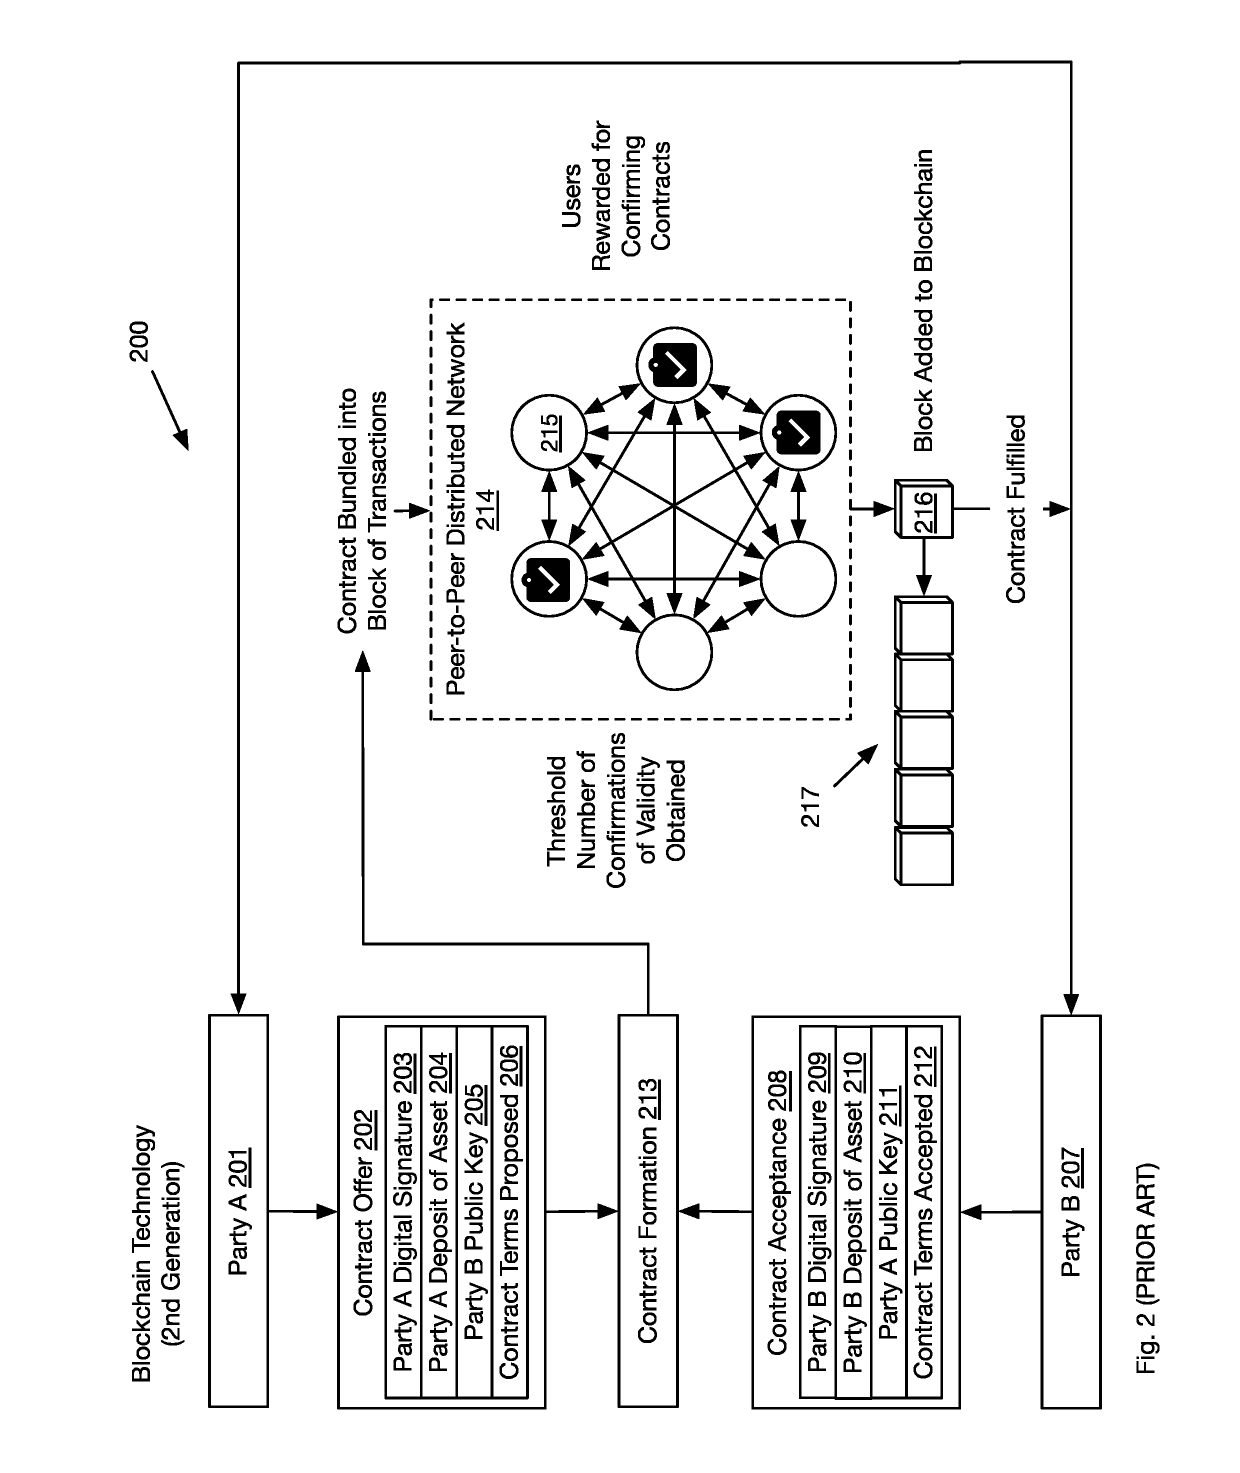 System and method for performance testing of scalable distributed network transactional databases